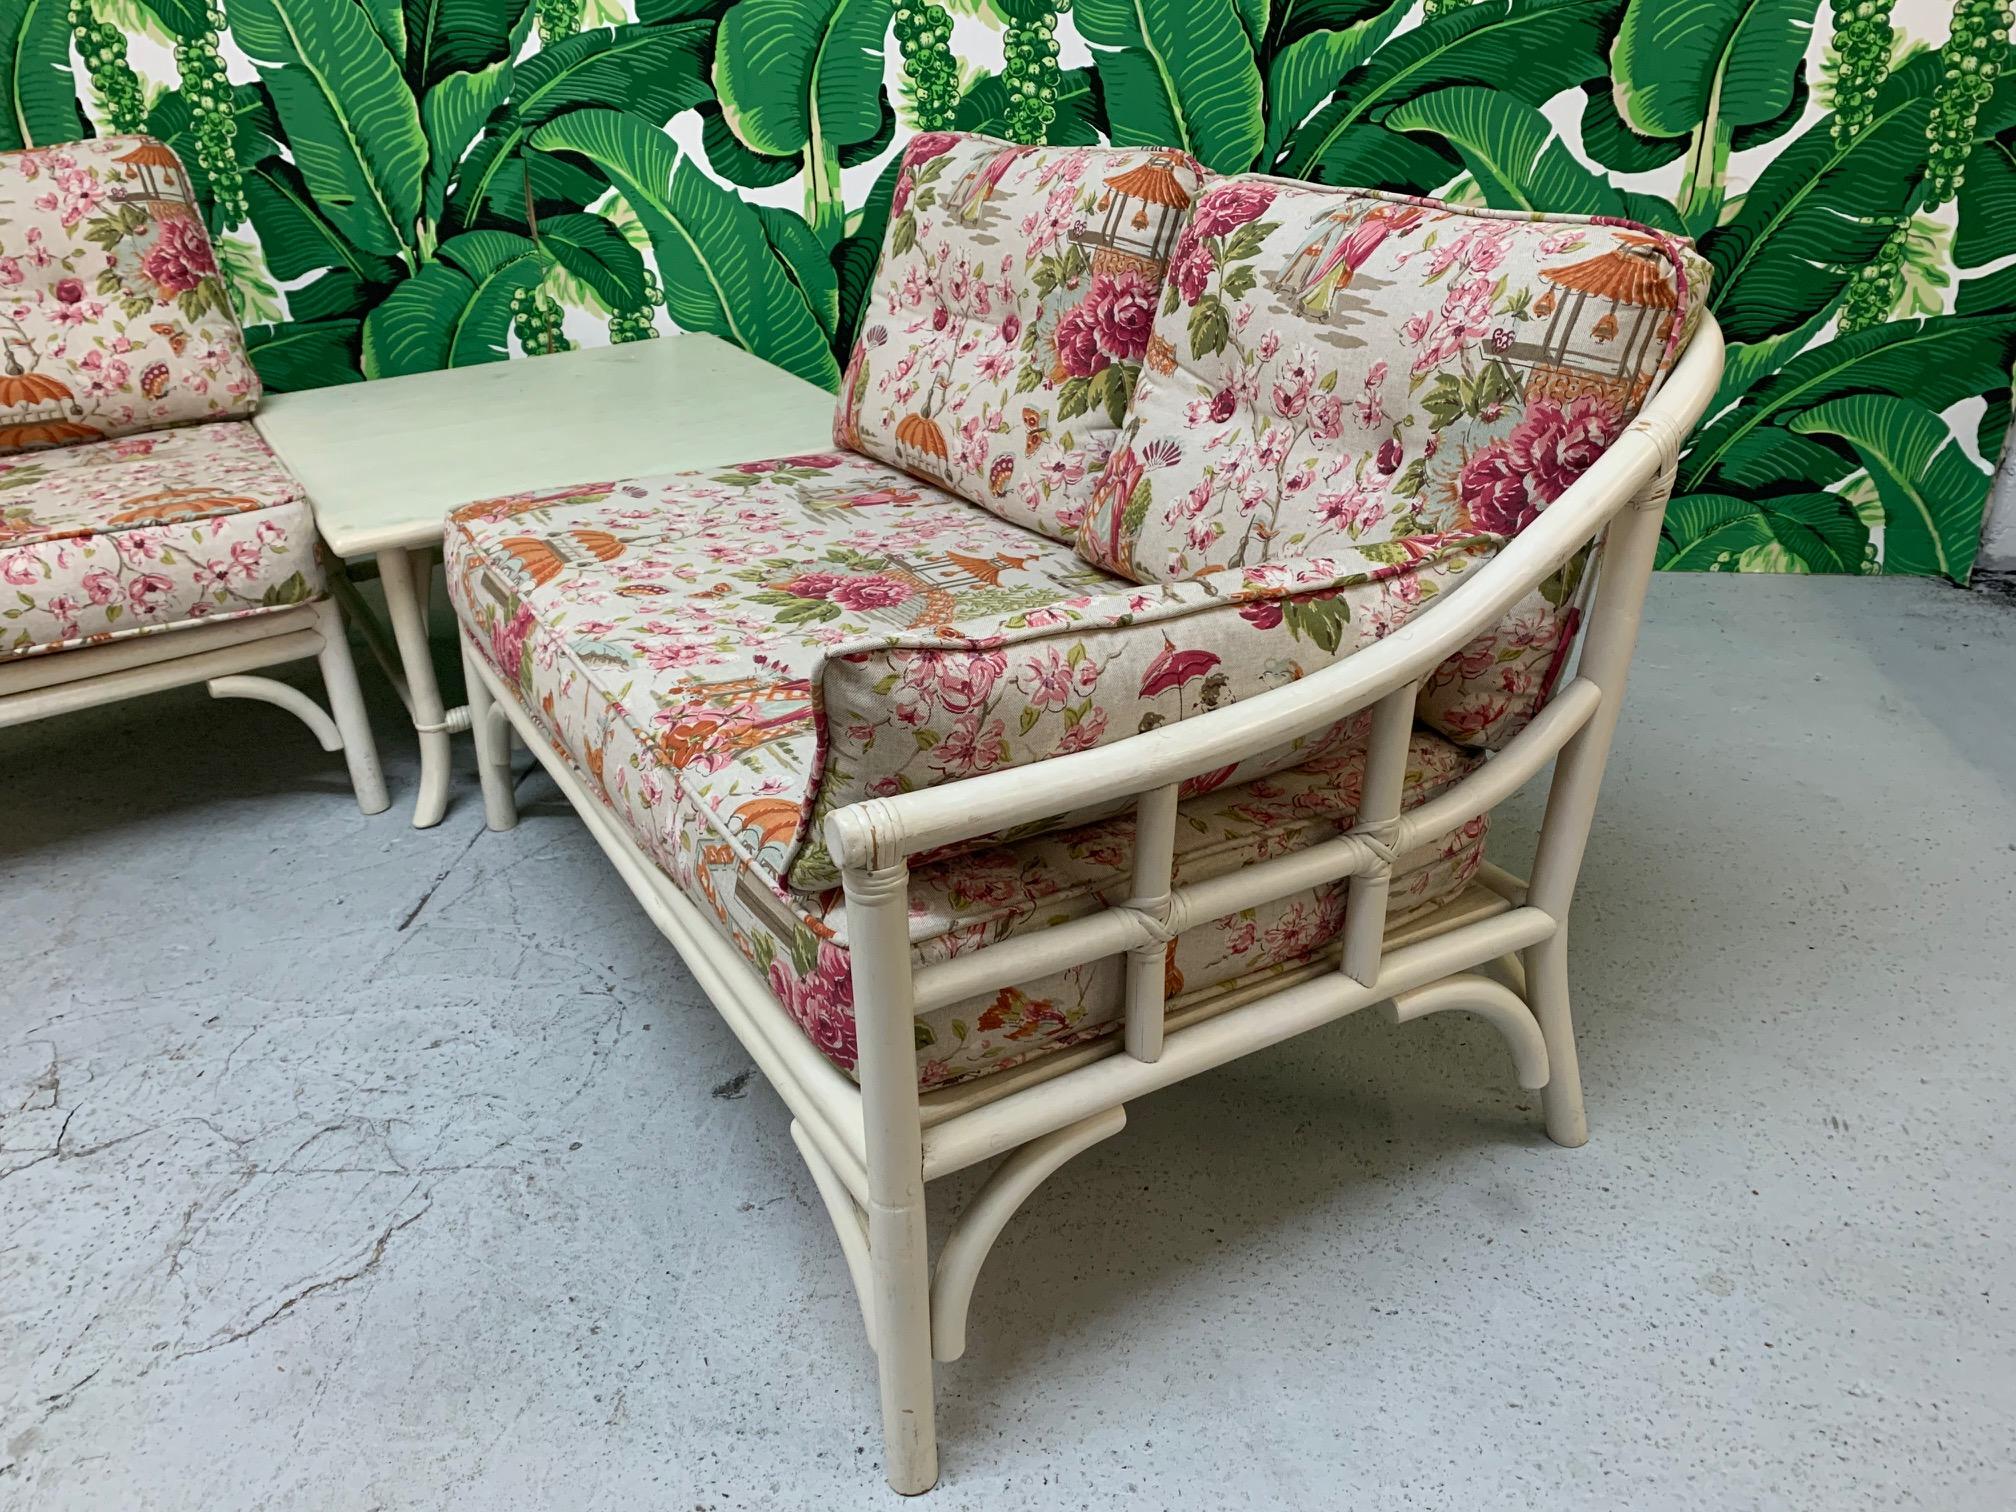 Pair of vintage rattan club chairs newly upholstered in a beautiful Asian chinoiserie print. Chinese scenes with flowers and a neutral background. Excellent condition. Cushions are newly reupholstered and in excellent condition. Finish shows some